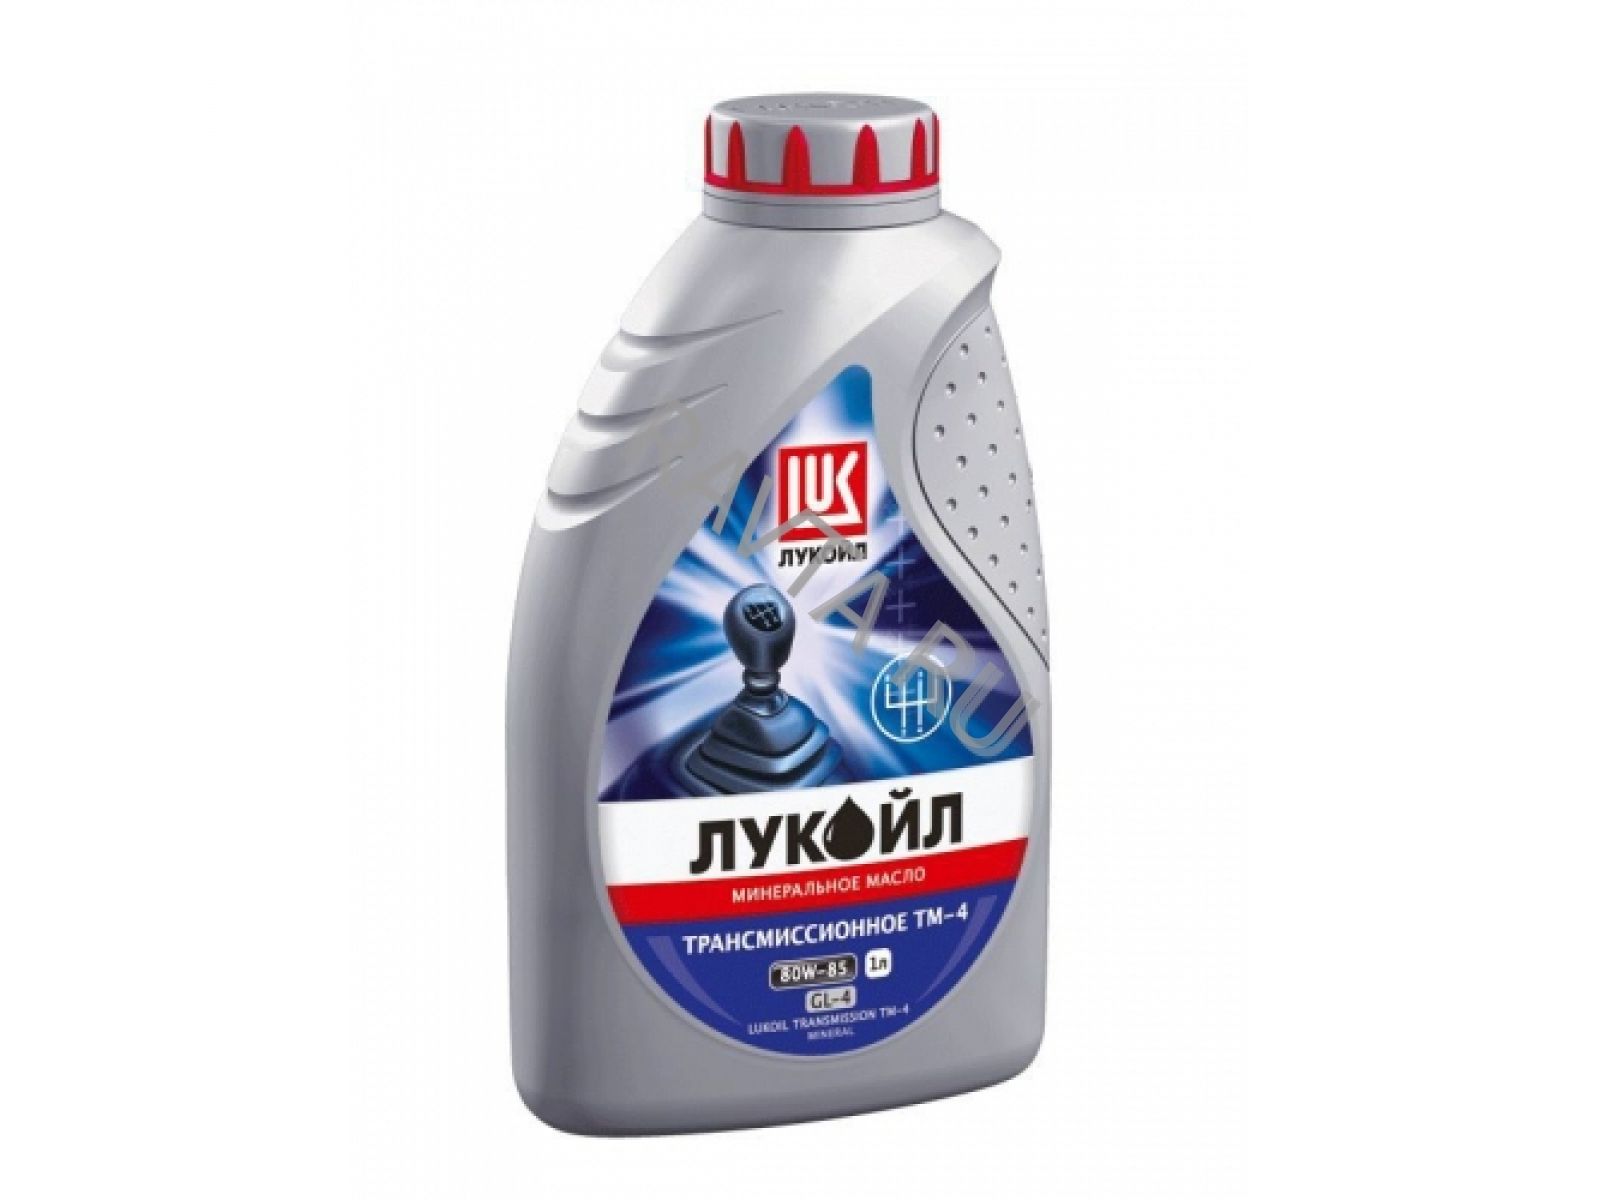 Масло лукойл 75w80